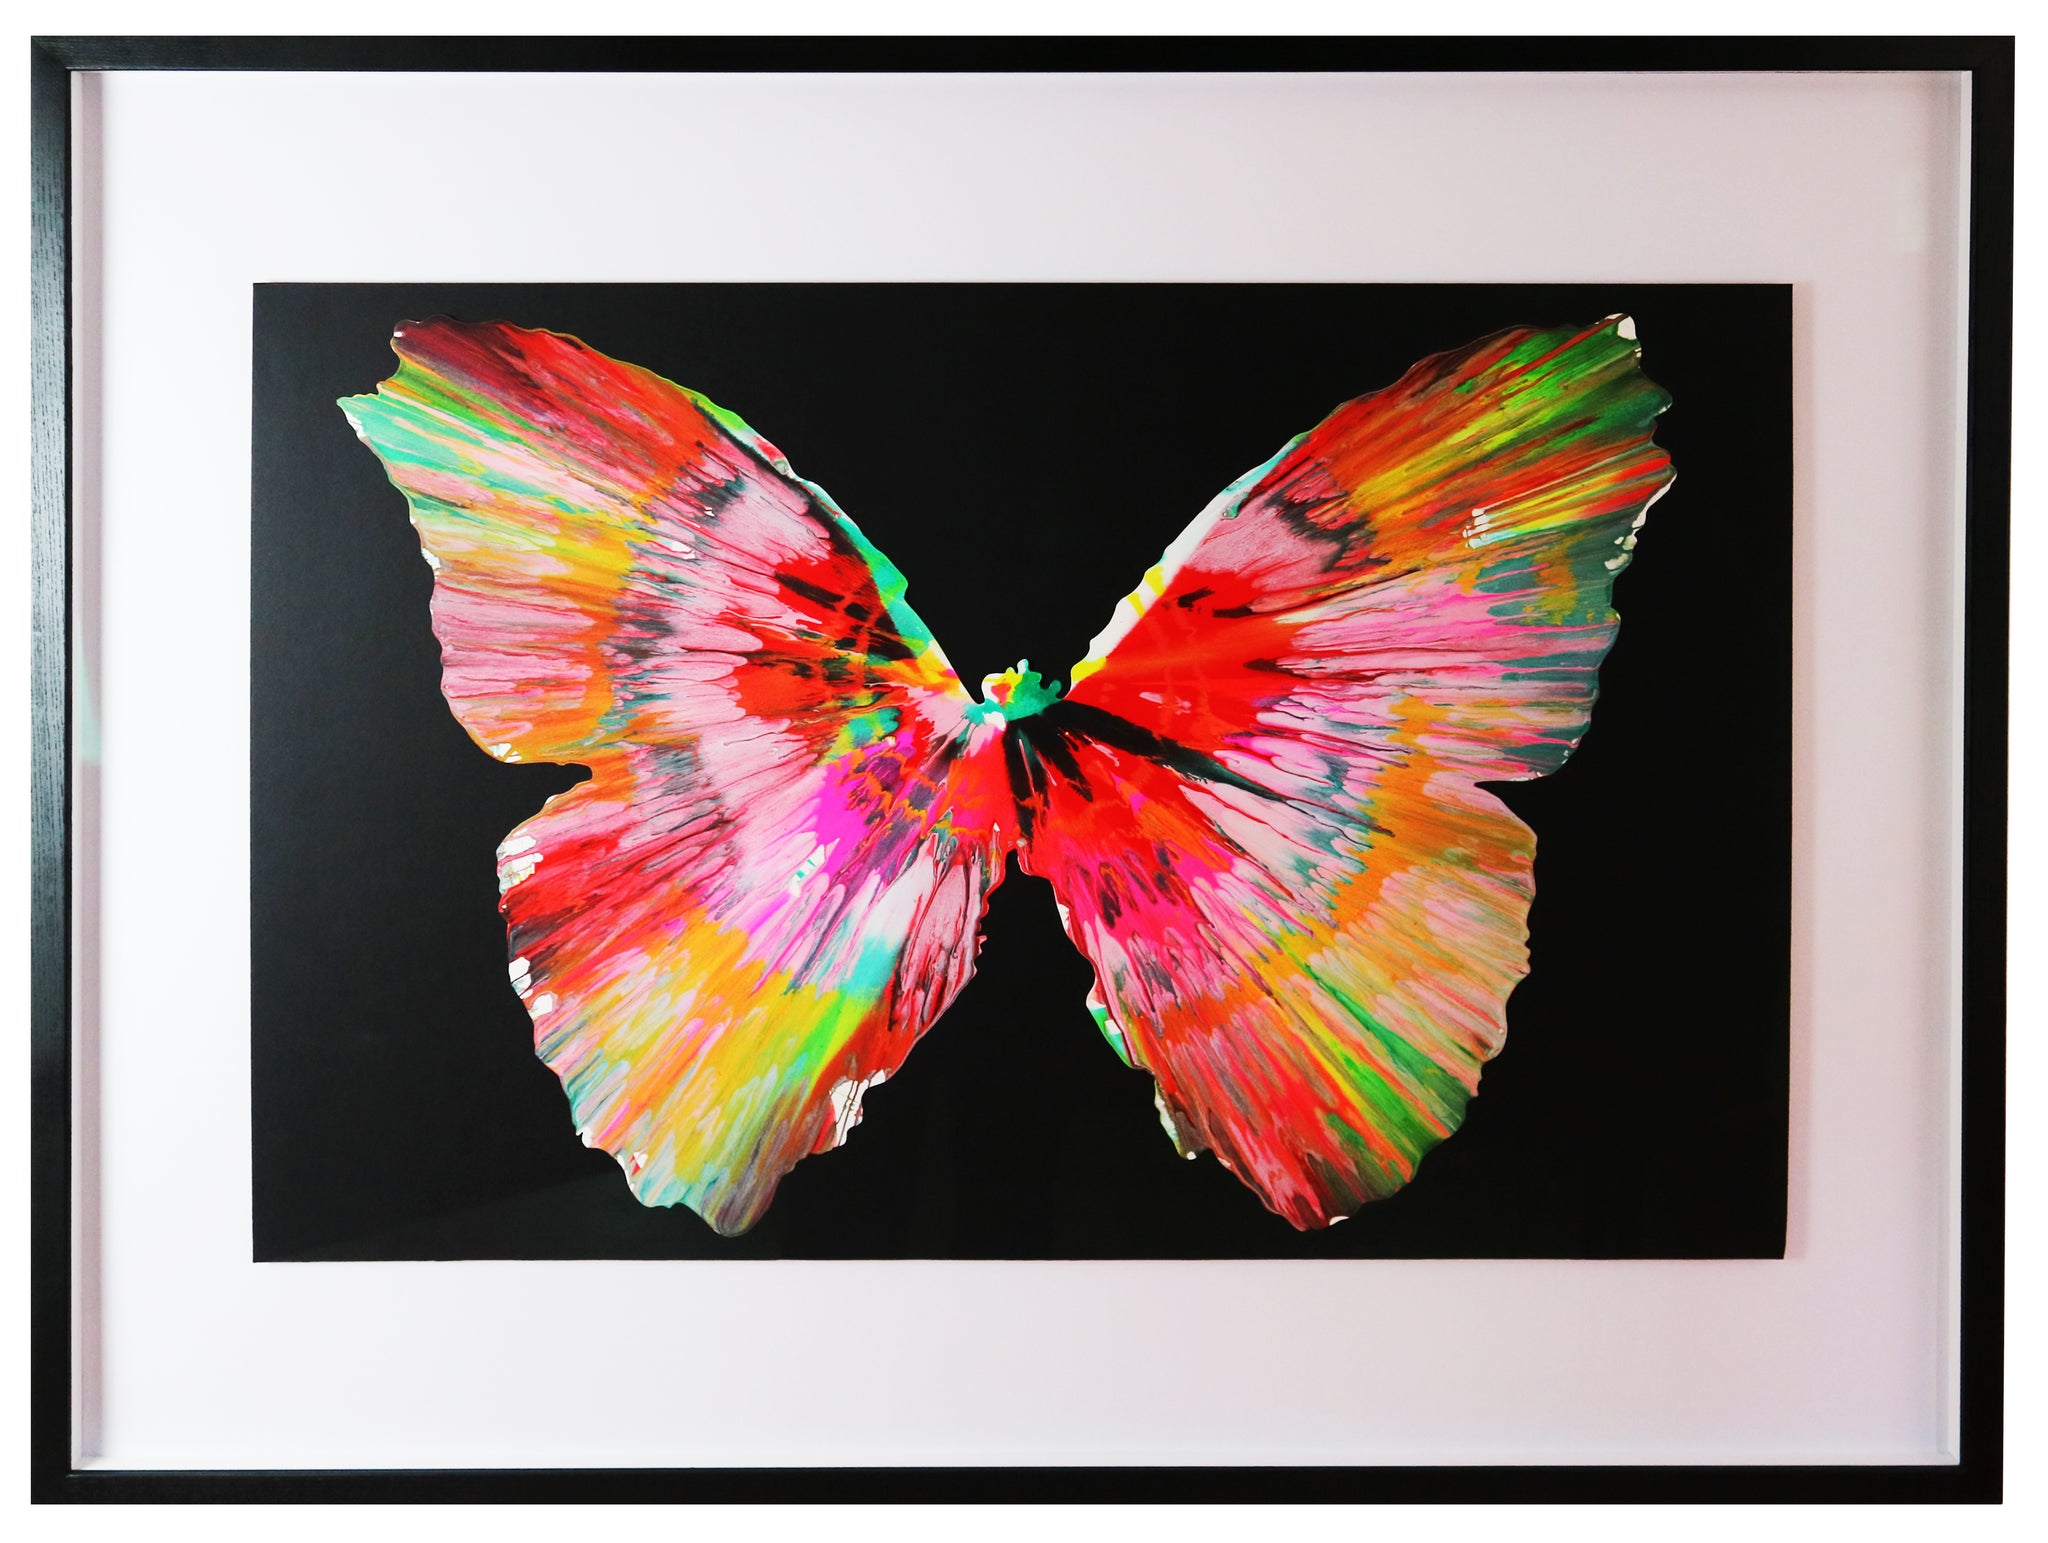 Damien Hirst Butterfly Spin Painting For Sale The Art Hound Gallery